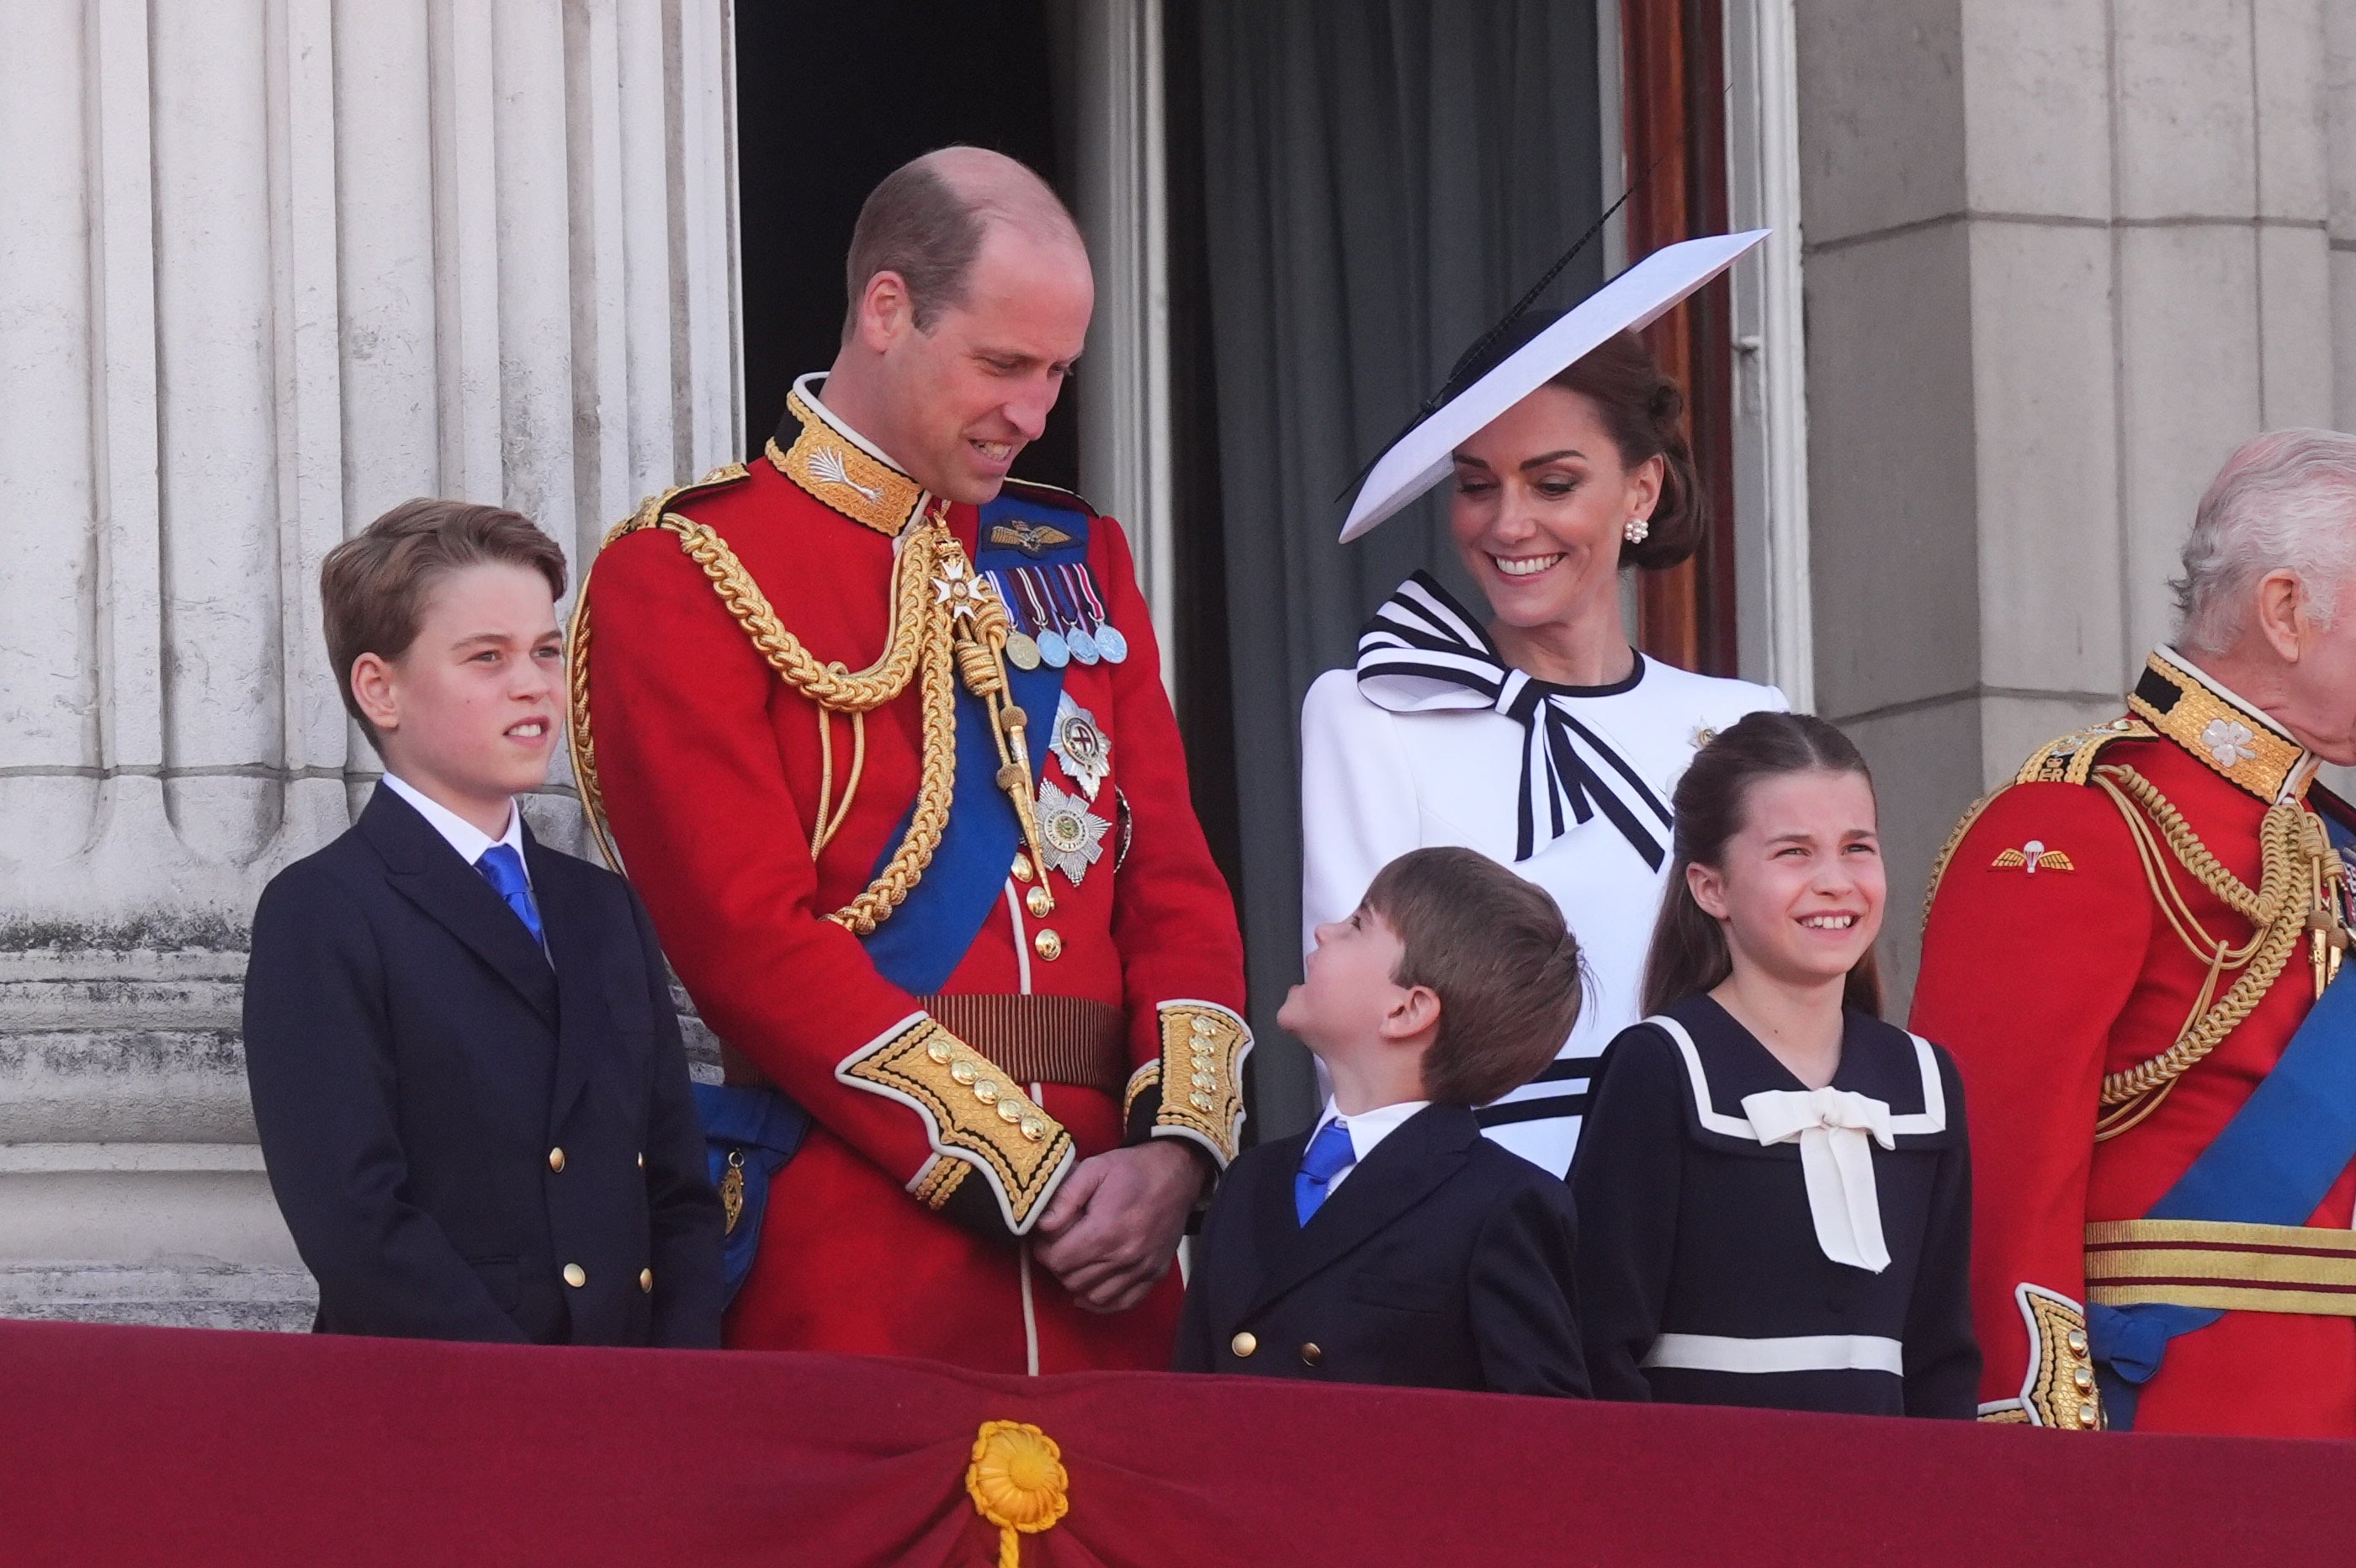 Kate and William enjoyed some family time on the balcony with their kids.